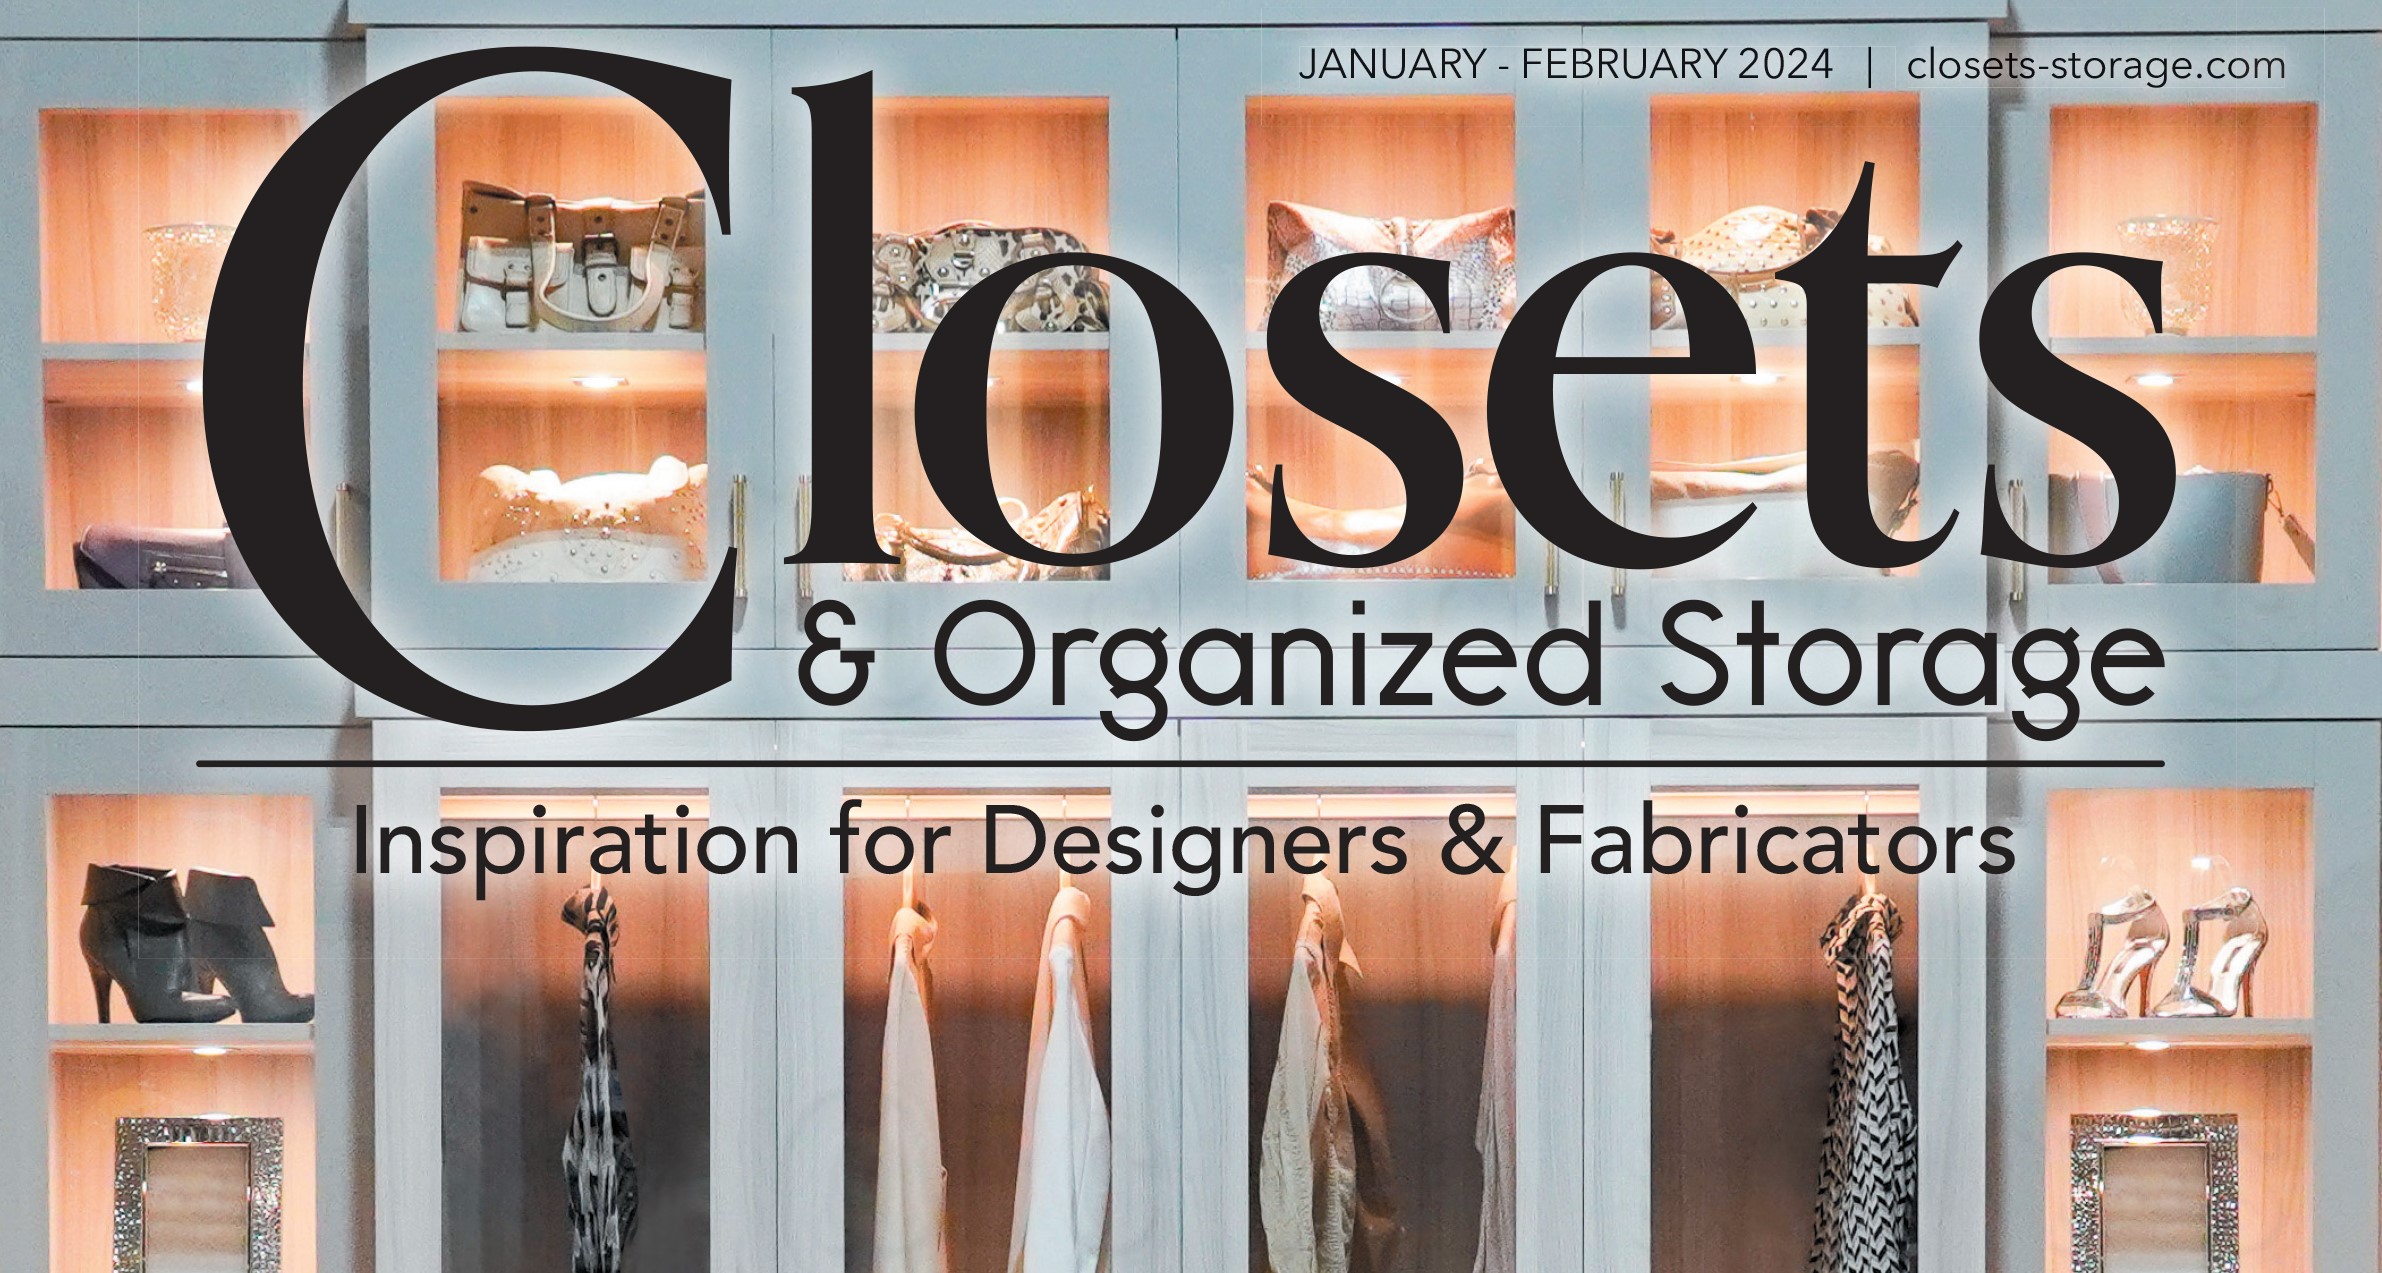 image of the closet magazine with Closets to go showroom luxury closets as the cover